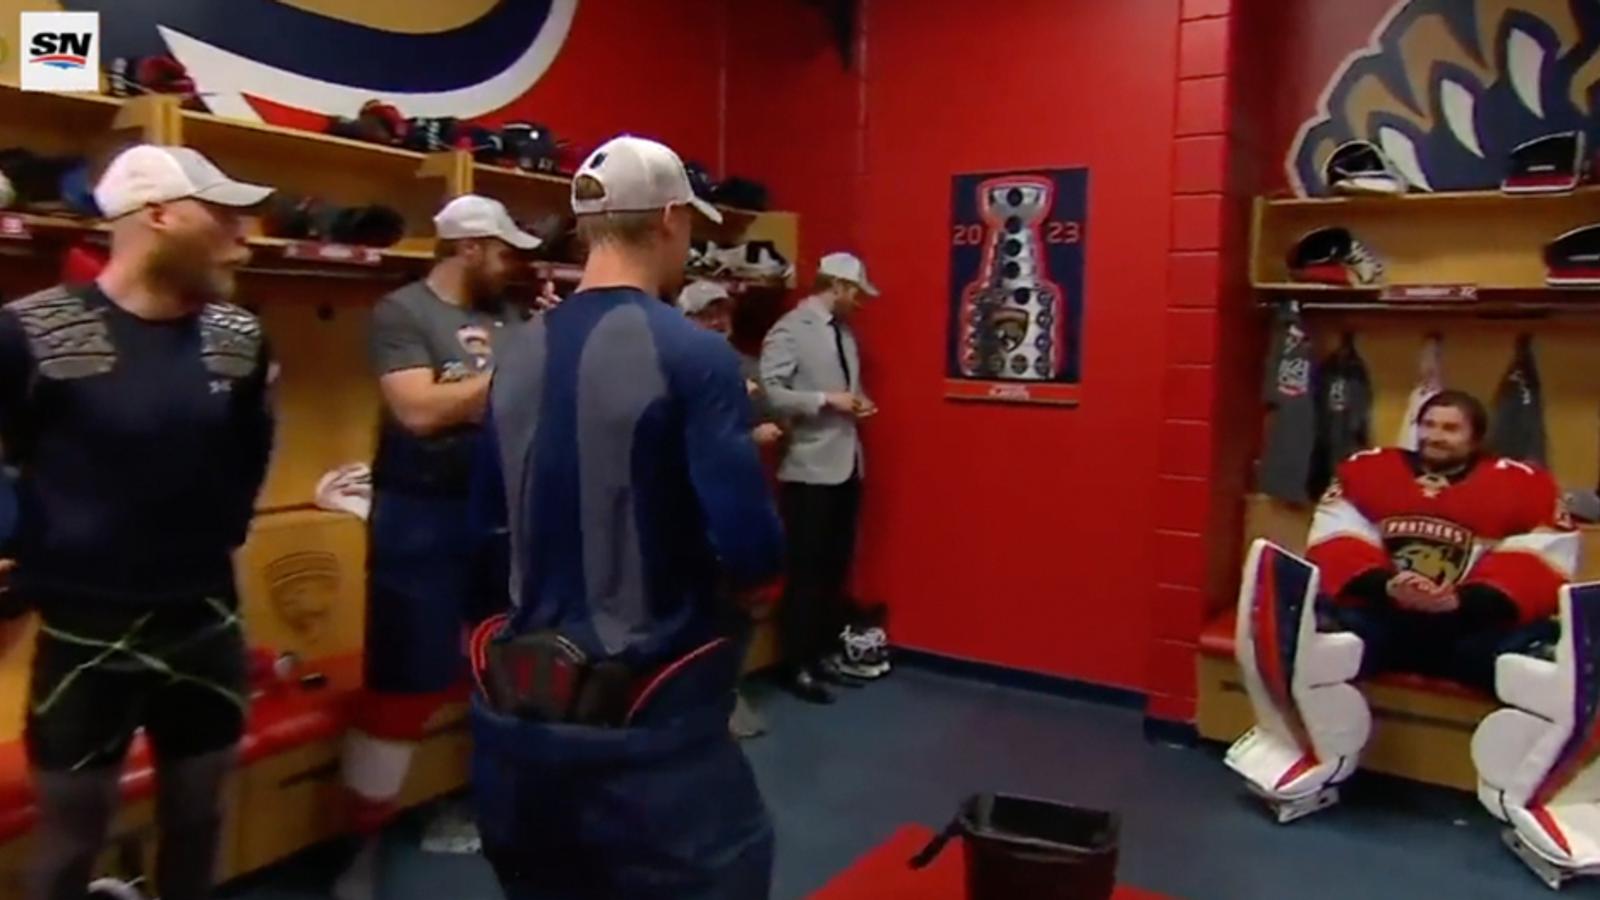 An emotional Bobrovsky sobs after Panthers clinch Stanley Cup Final berth